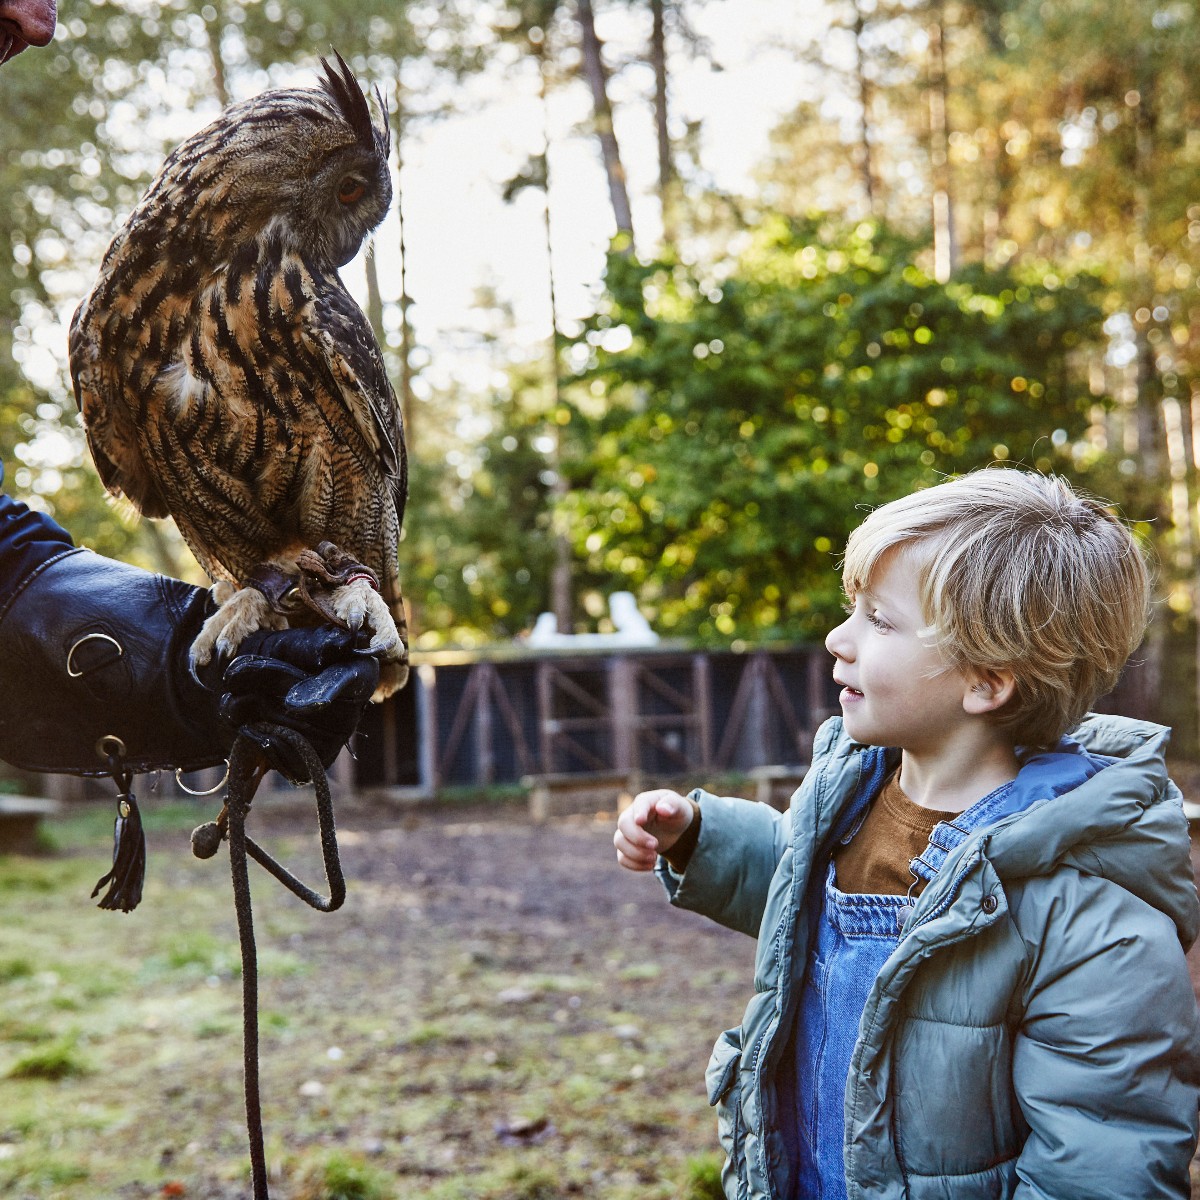 The forest is waking up…

Our Rangers Lodge has so many fun and educational activities available to show you the wildlife in the forest.

Take part in:
🌲Build a Nature House
🦉Baby Owls or Encounter With Owls
🔍Nature Detectives
🚶Nature Walk 

🔗https://t.co/LRPRjI5tID https://t.co/BvQvRGcDlv